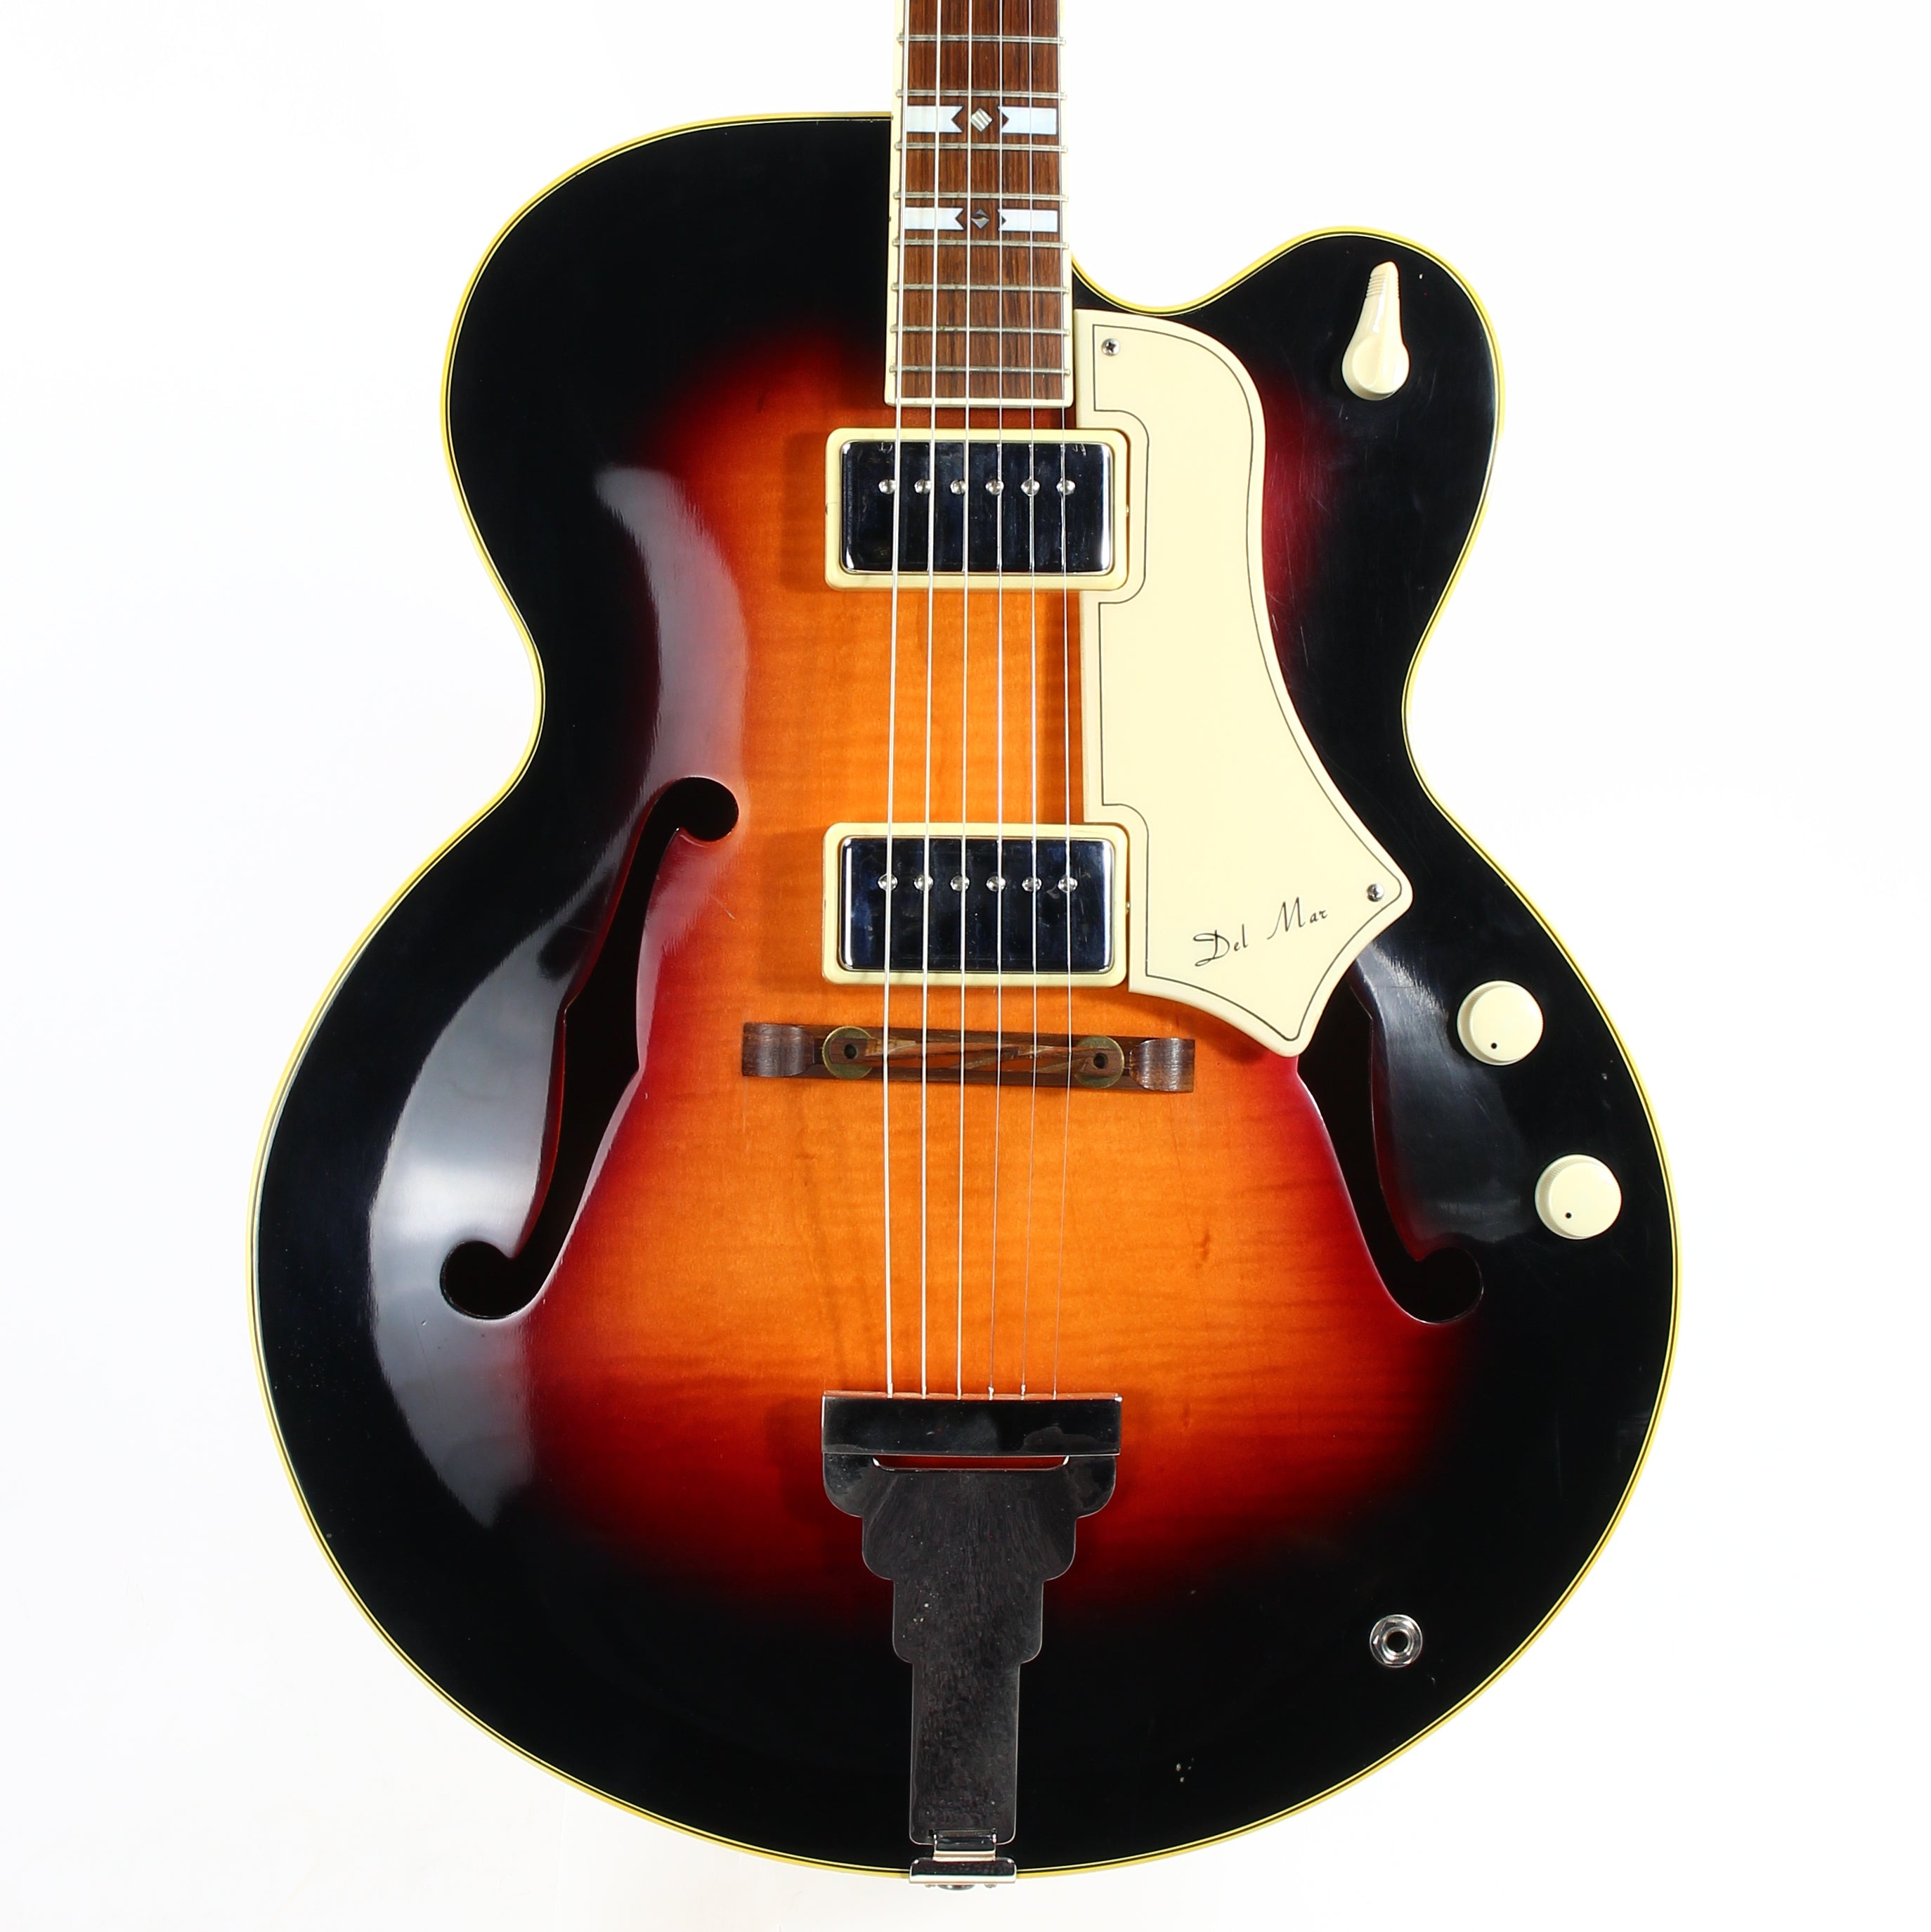 RARE! 1954 National 1103 Del Mar - Gibson ES-350 Archtop Electric Guitar Valco